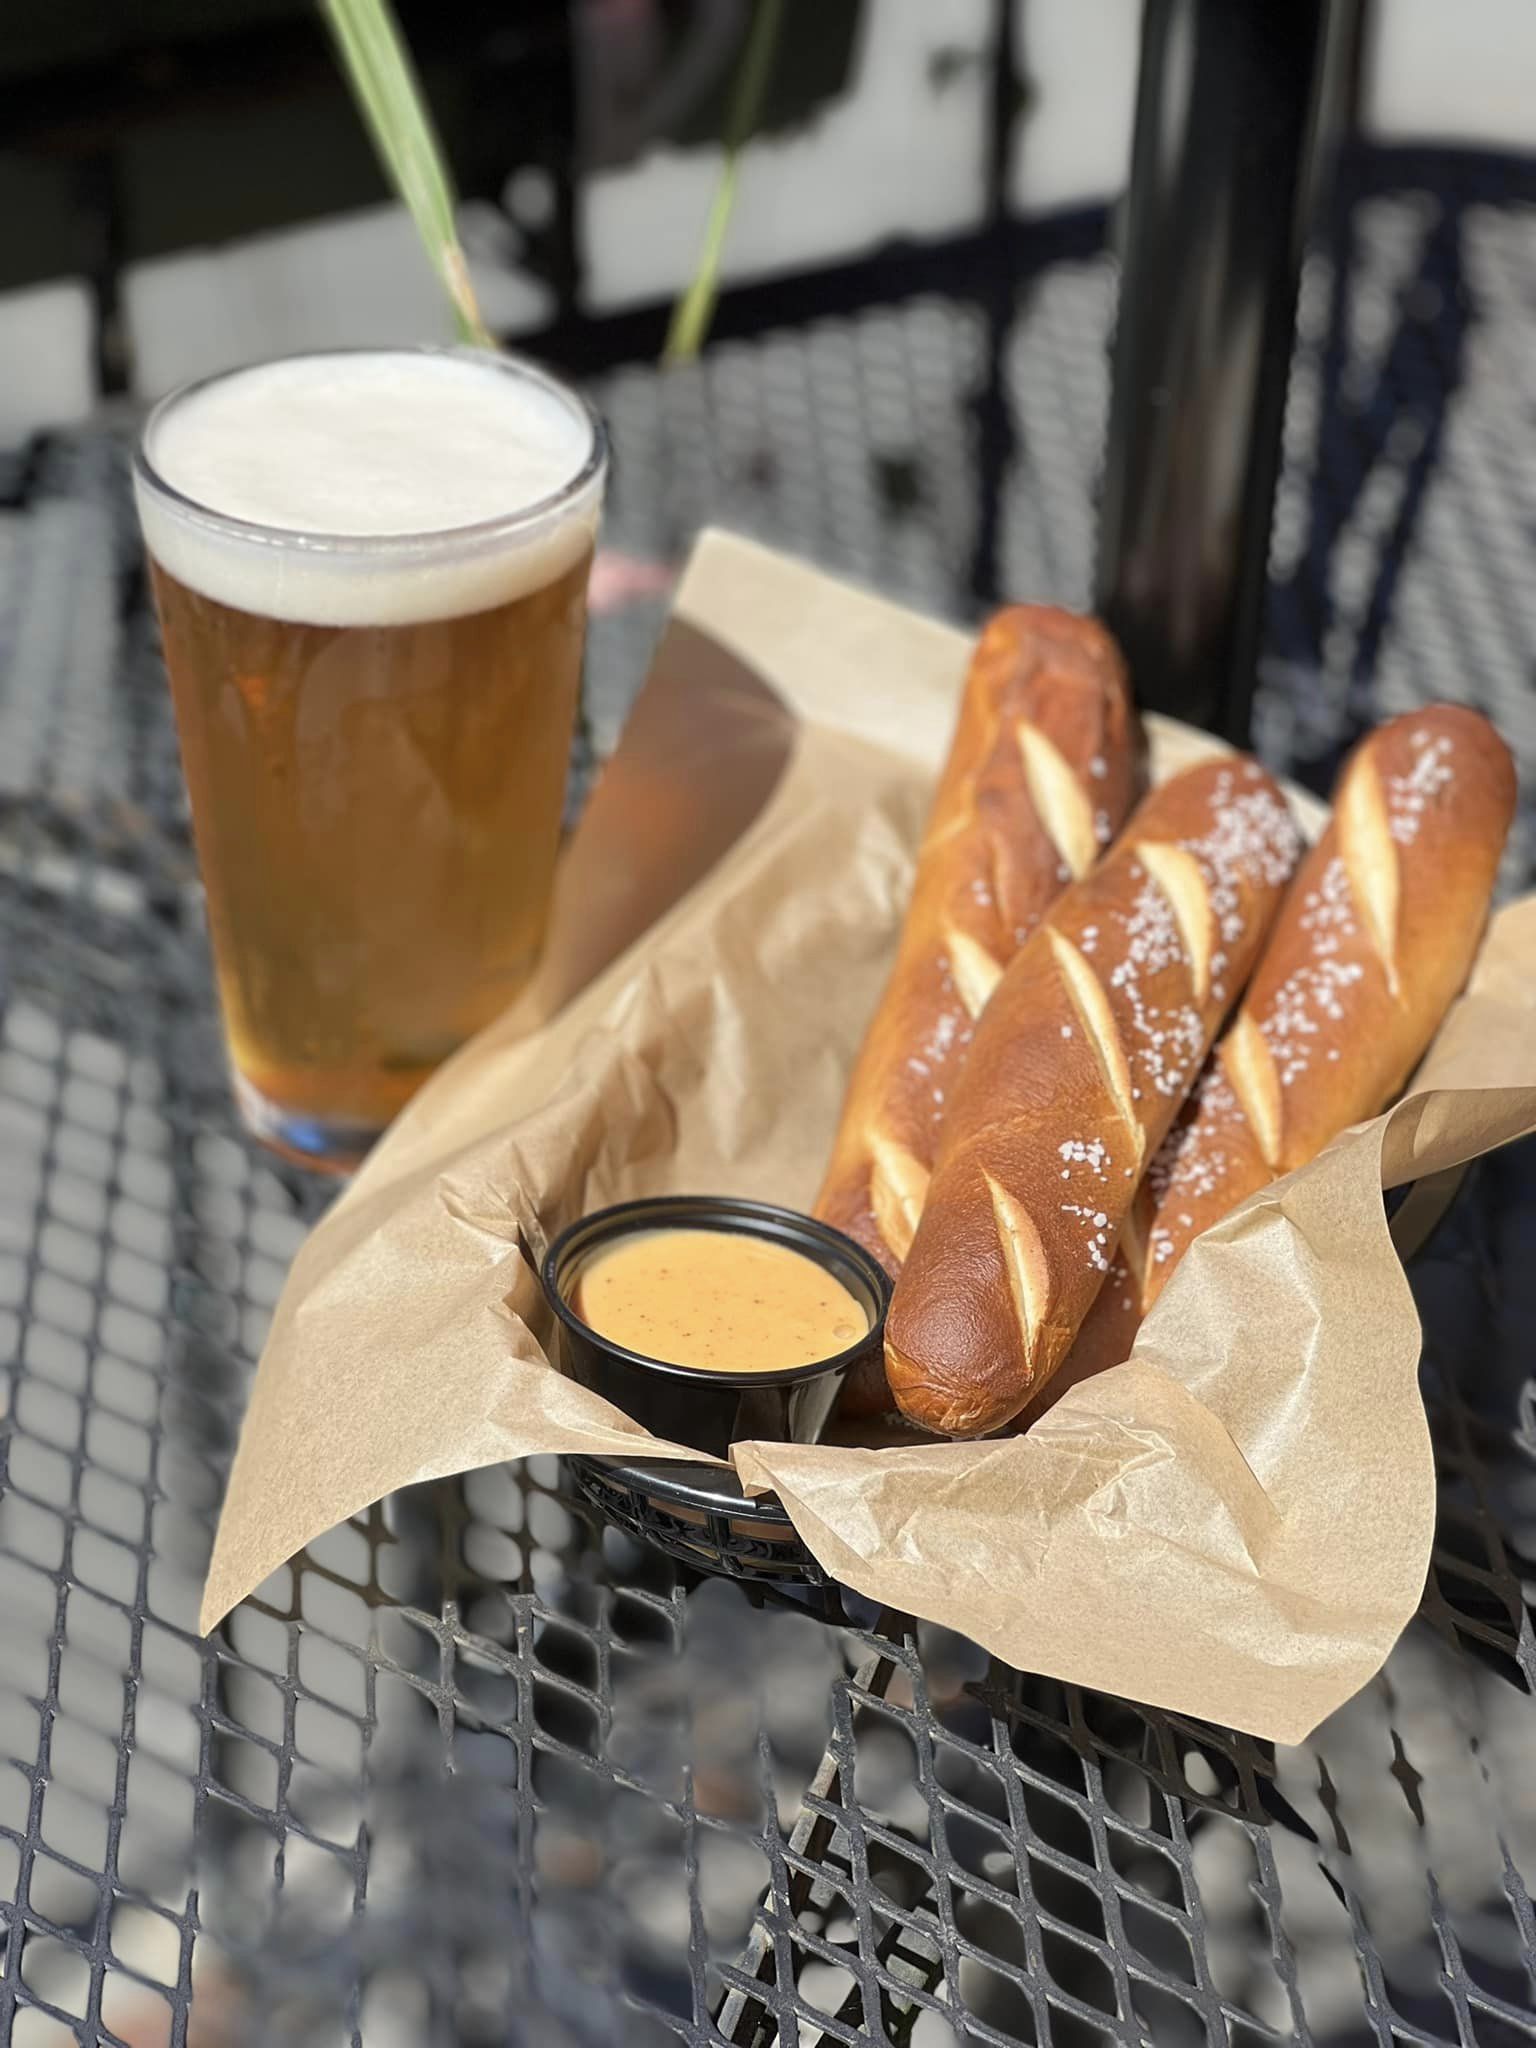 Two Ladders pretzels and beer